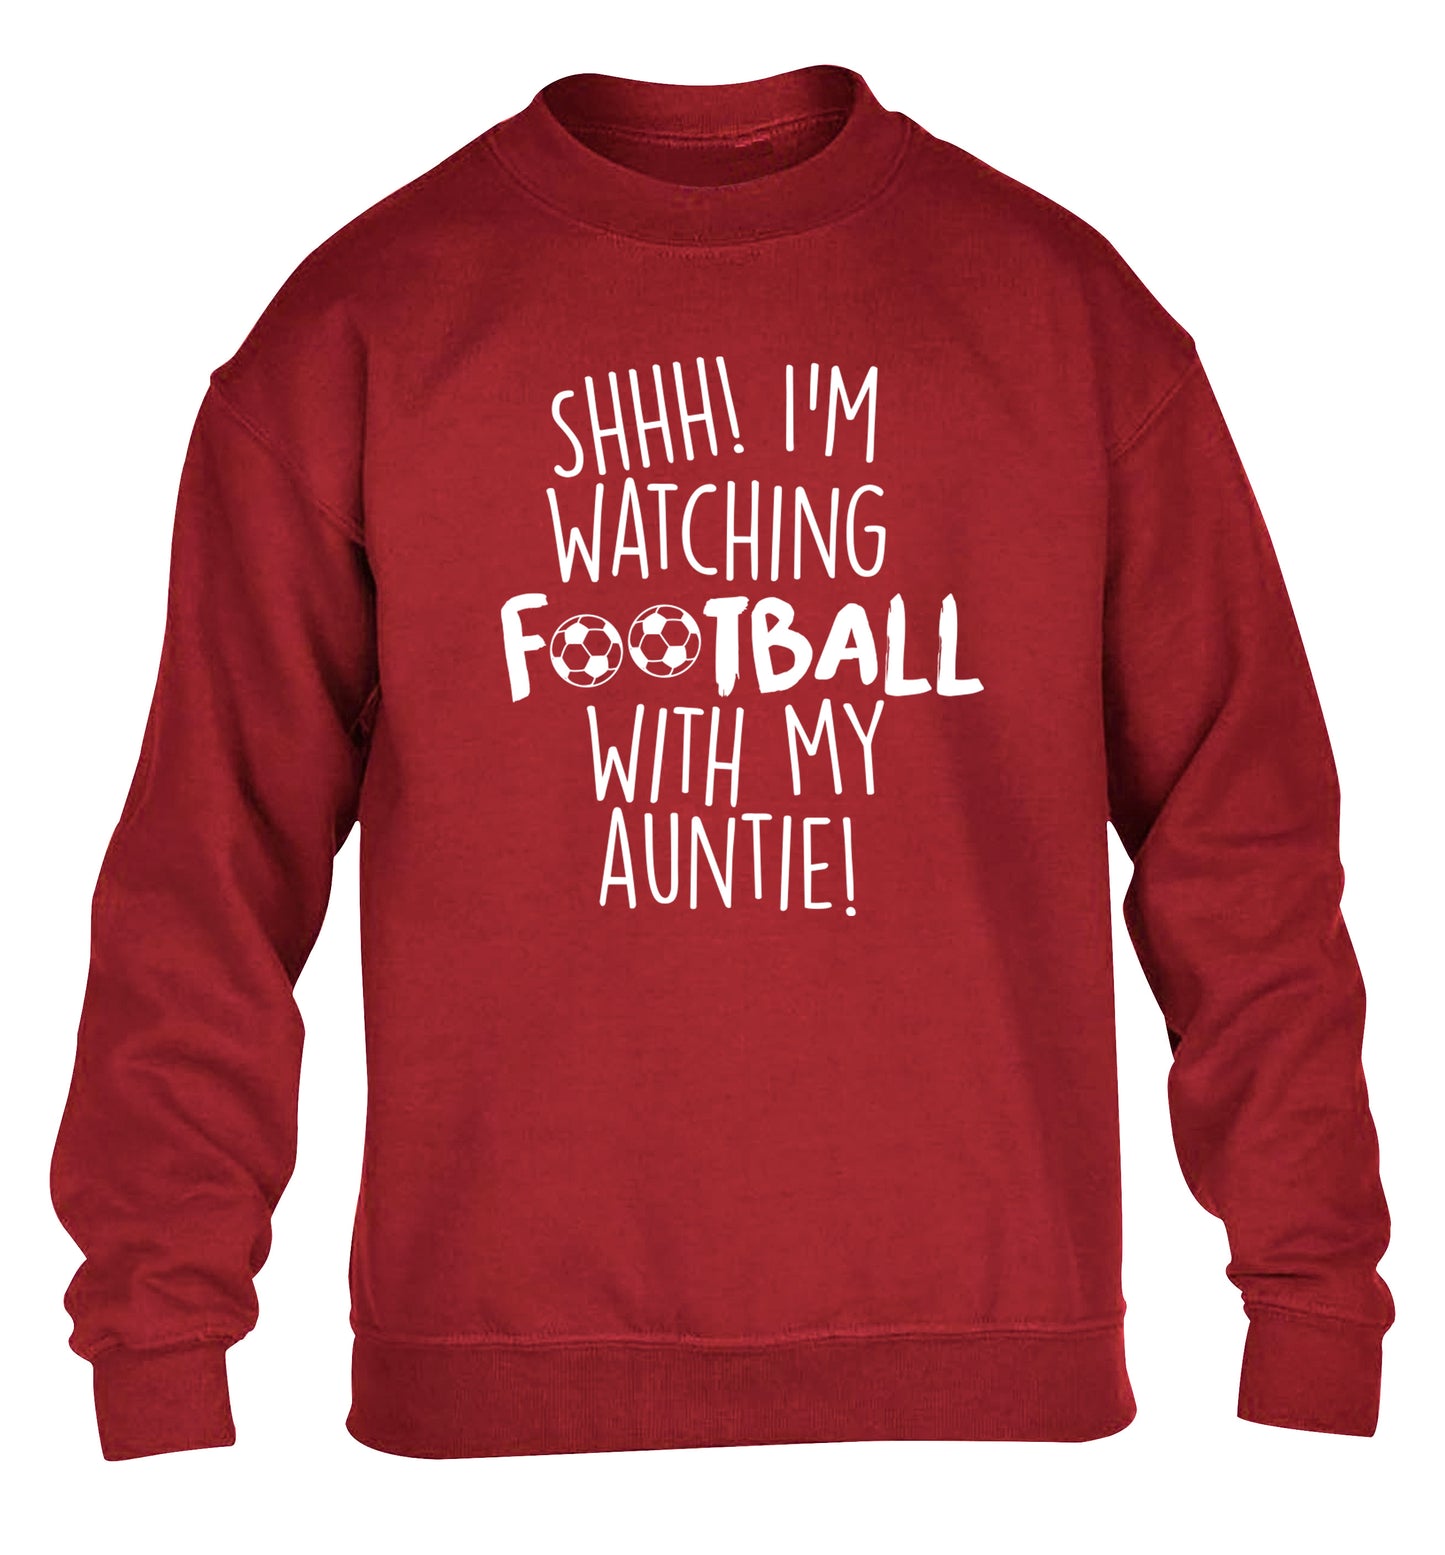 Shhh I'm watching football with my auntie children's grey sweater 12-14 Years